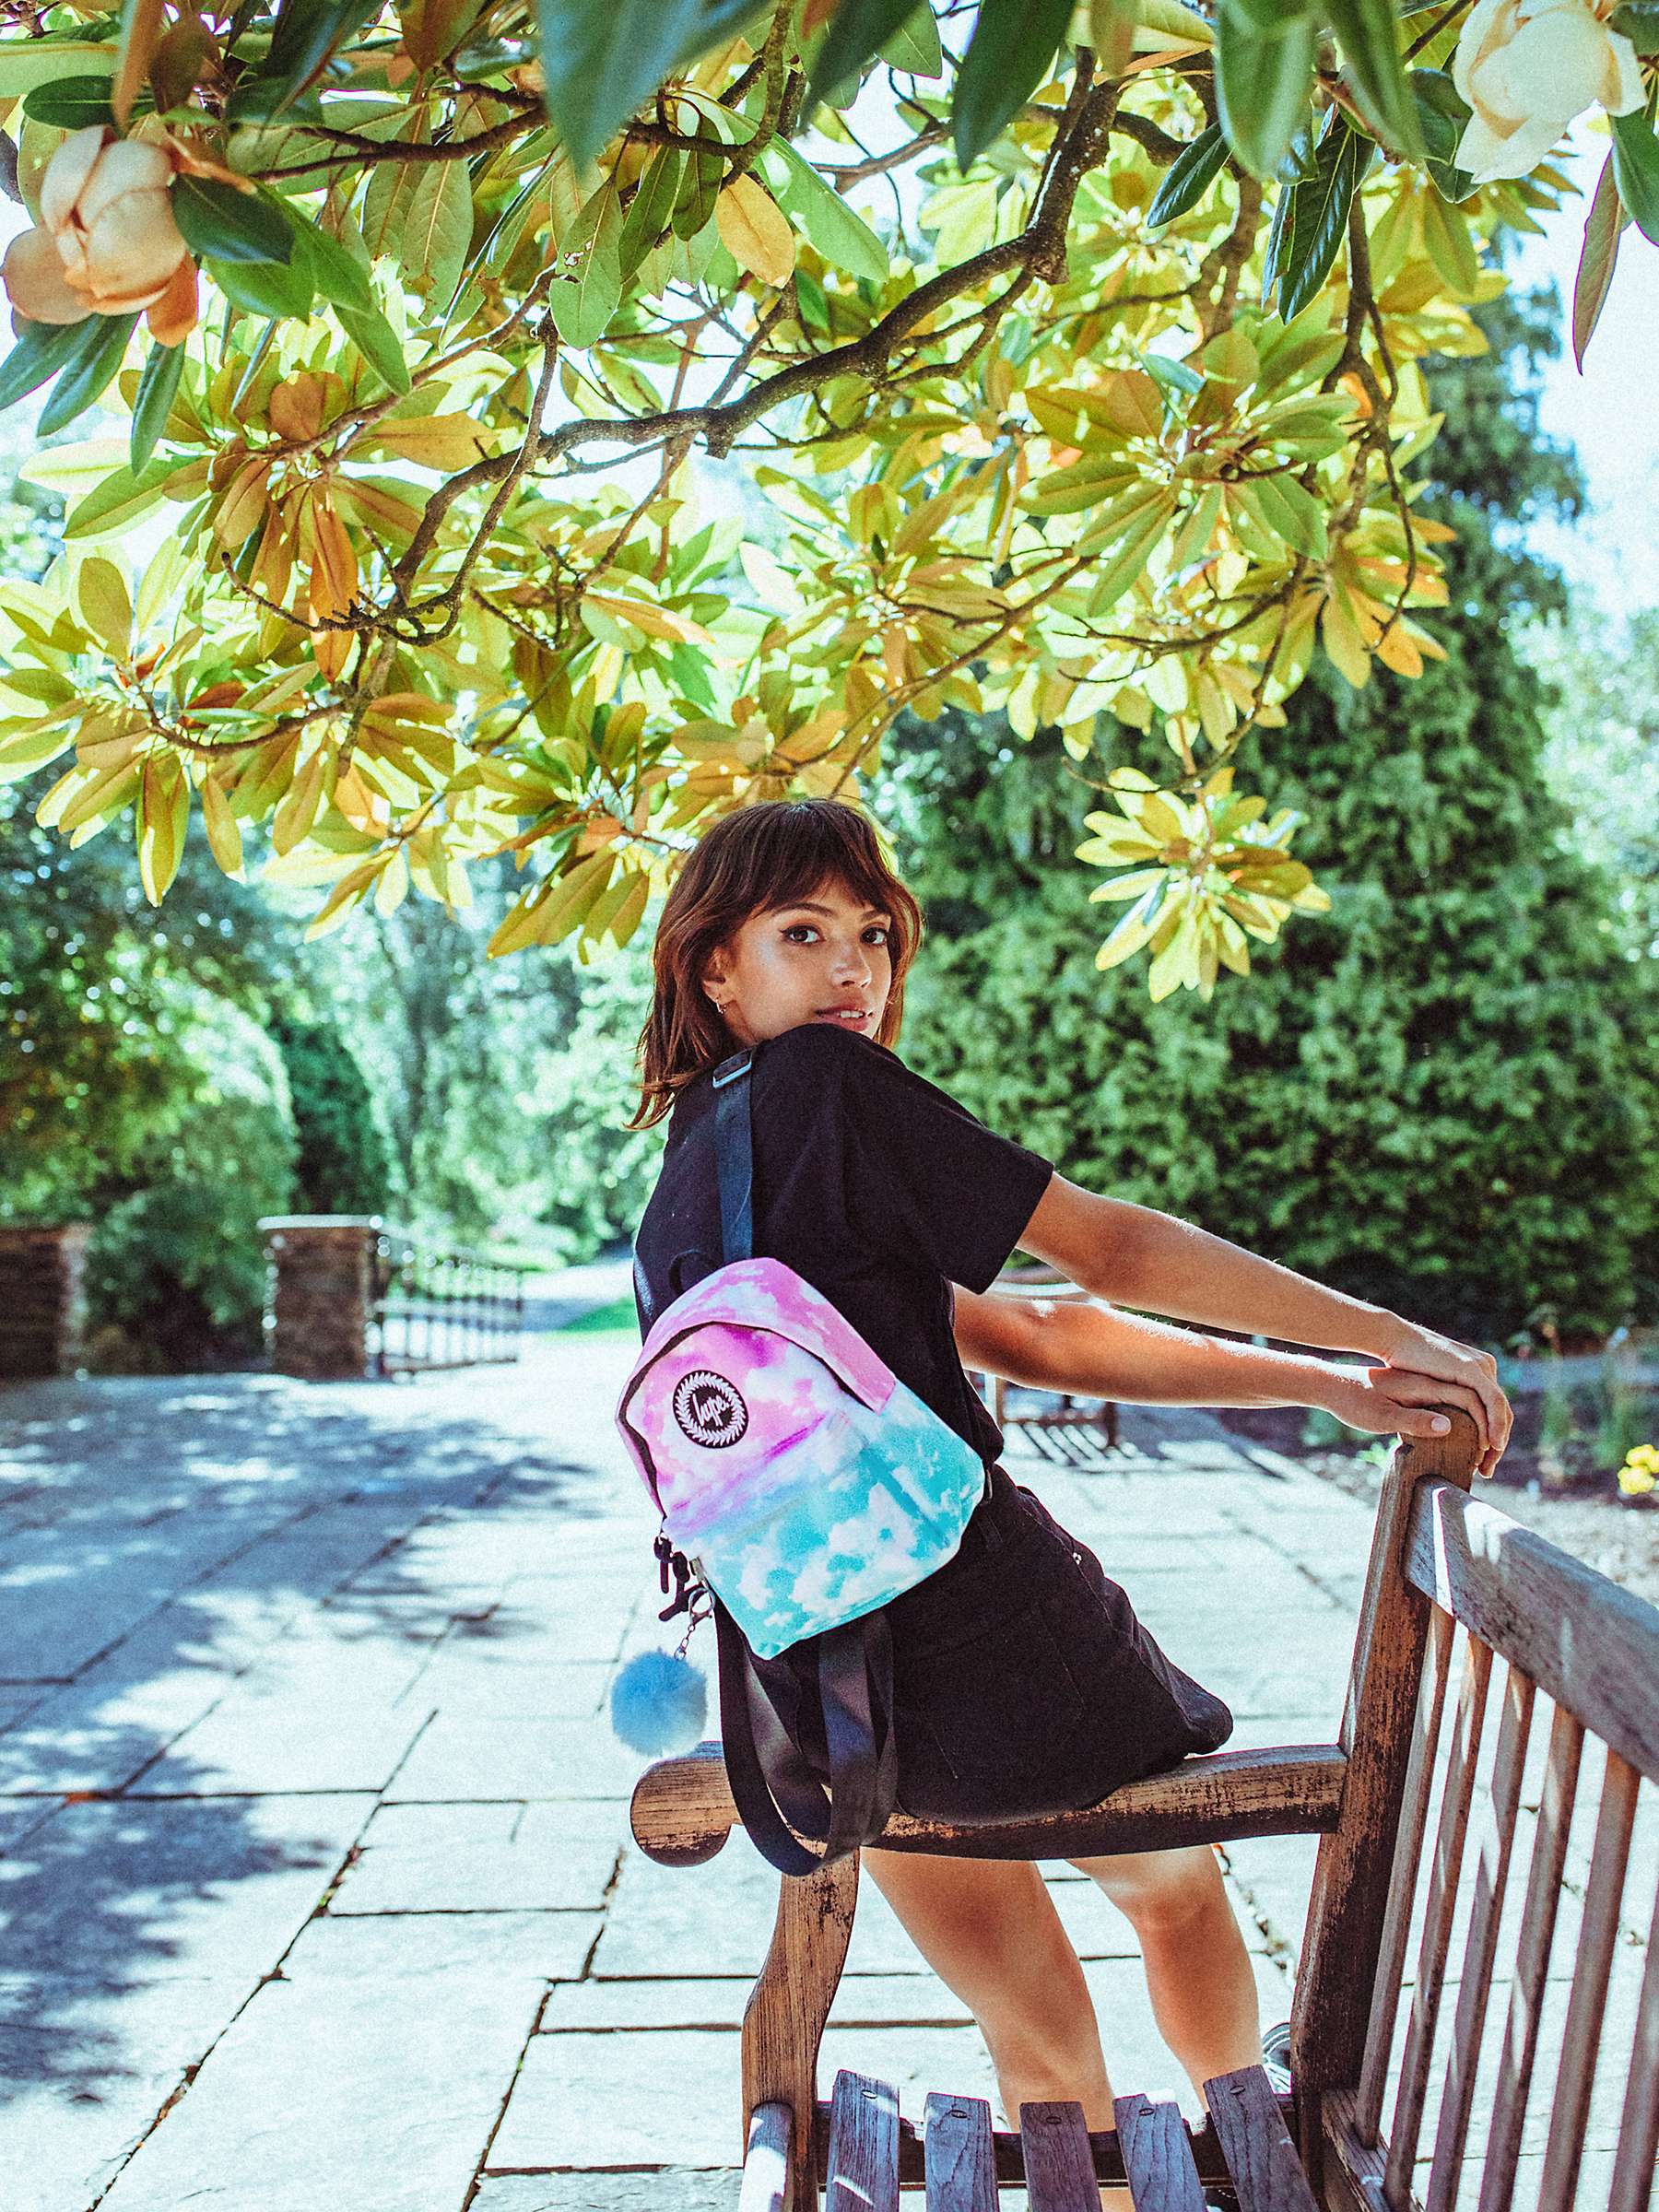 Buy Hype Kids' Clouds Fade Mini Backpack, Multi Online at johnlewis.com